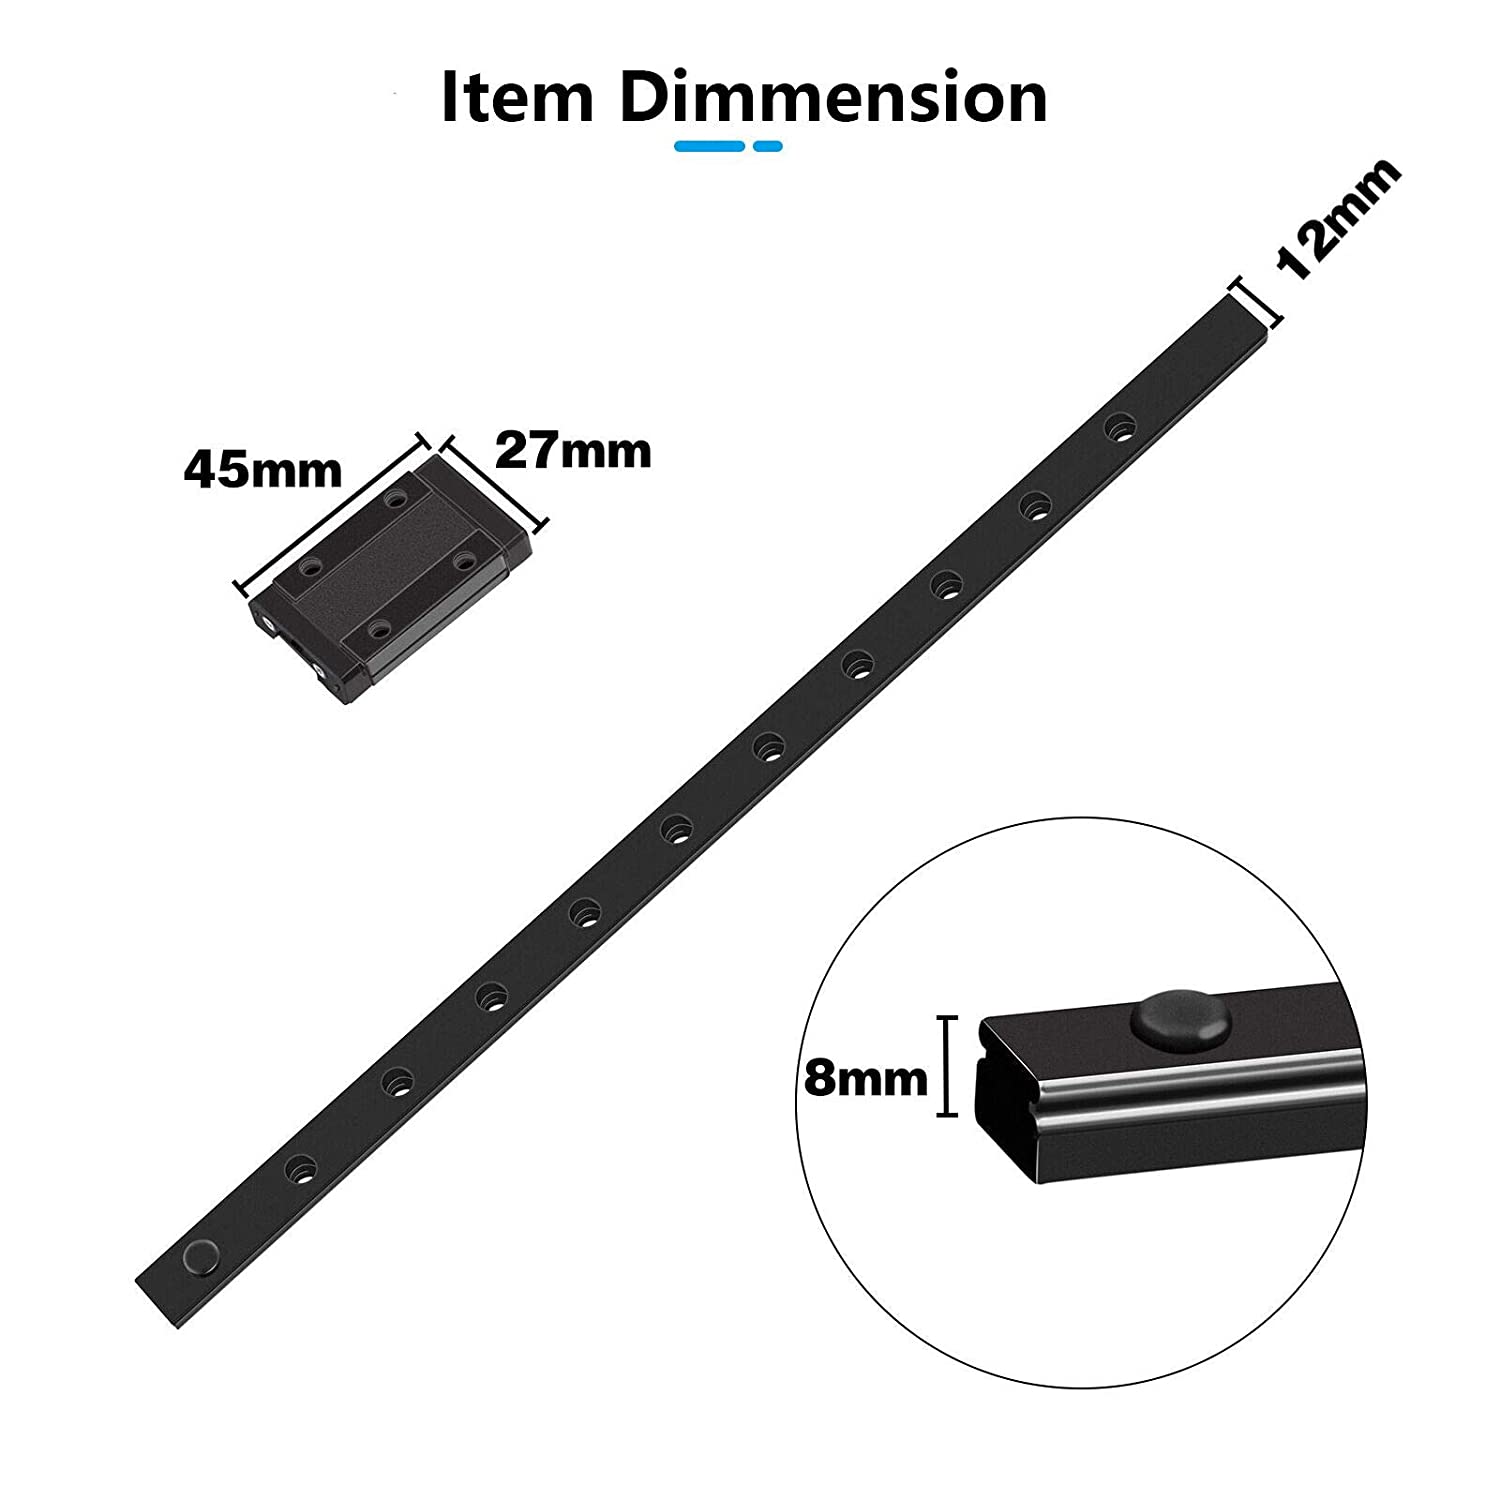 Black MGN12 Linear Sliding Guide Rail 350mm with MGN12H Bearing Steel Carriage Block for CoreXY DIY 3D Printer and CNC Machines